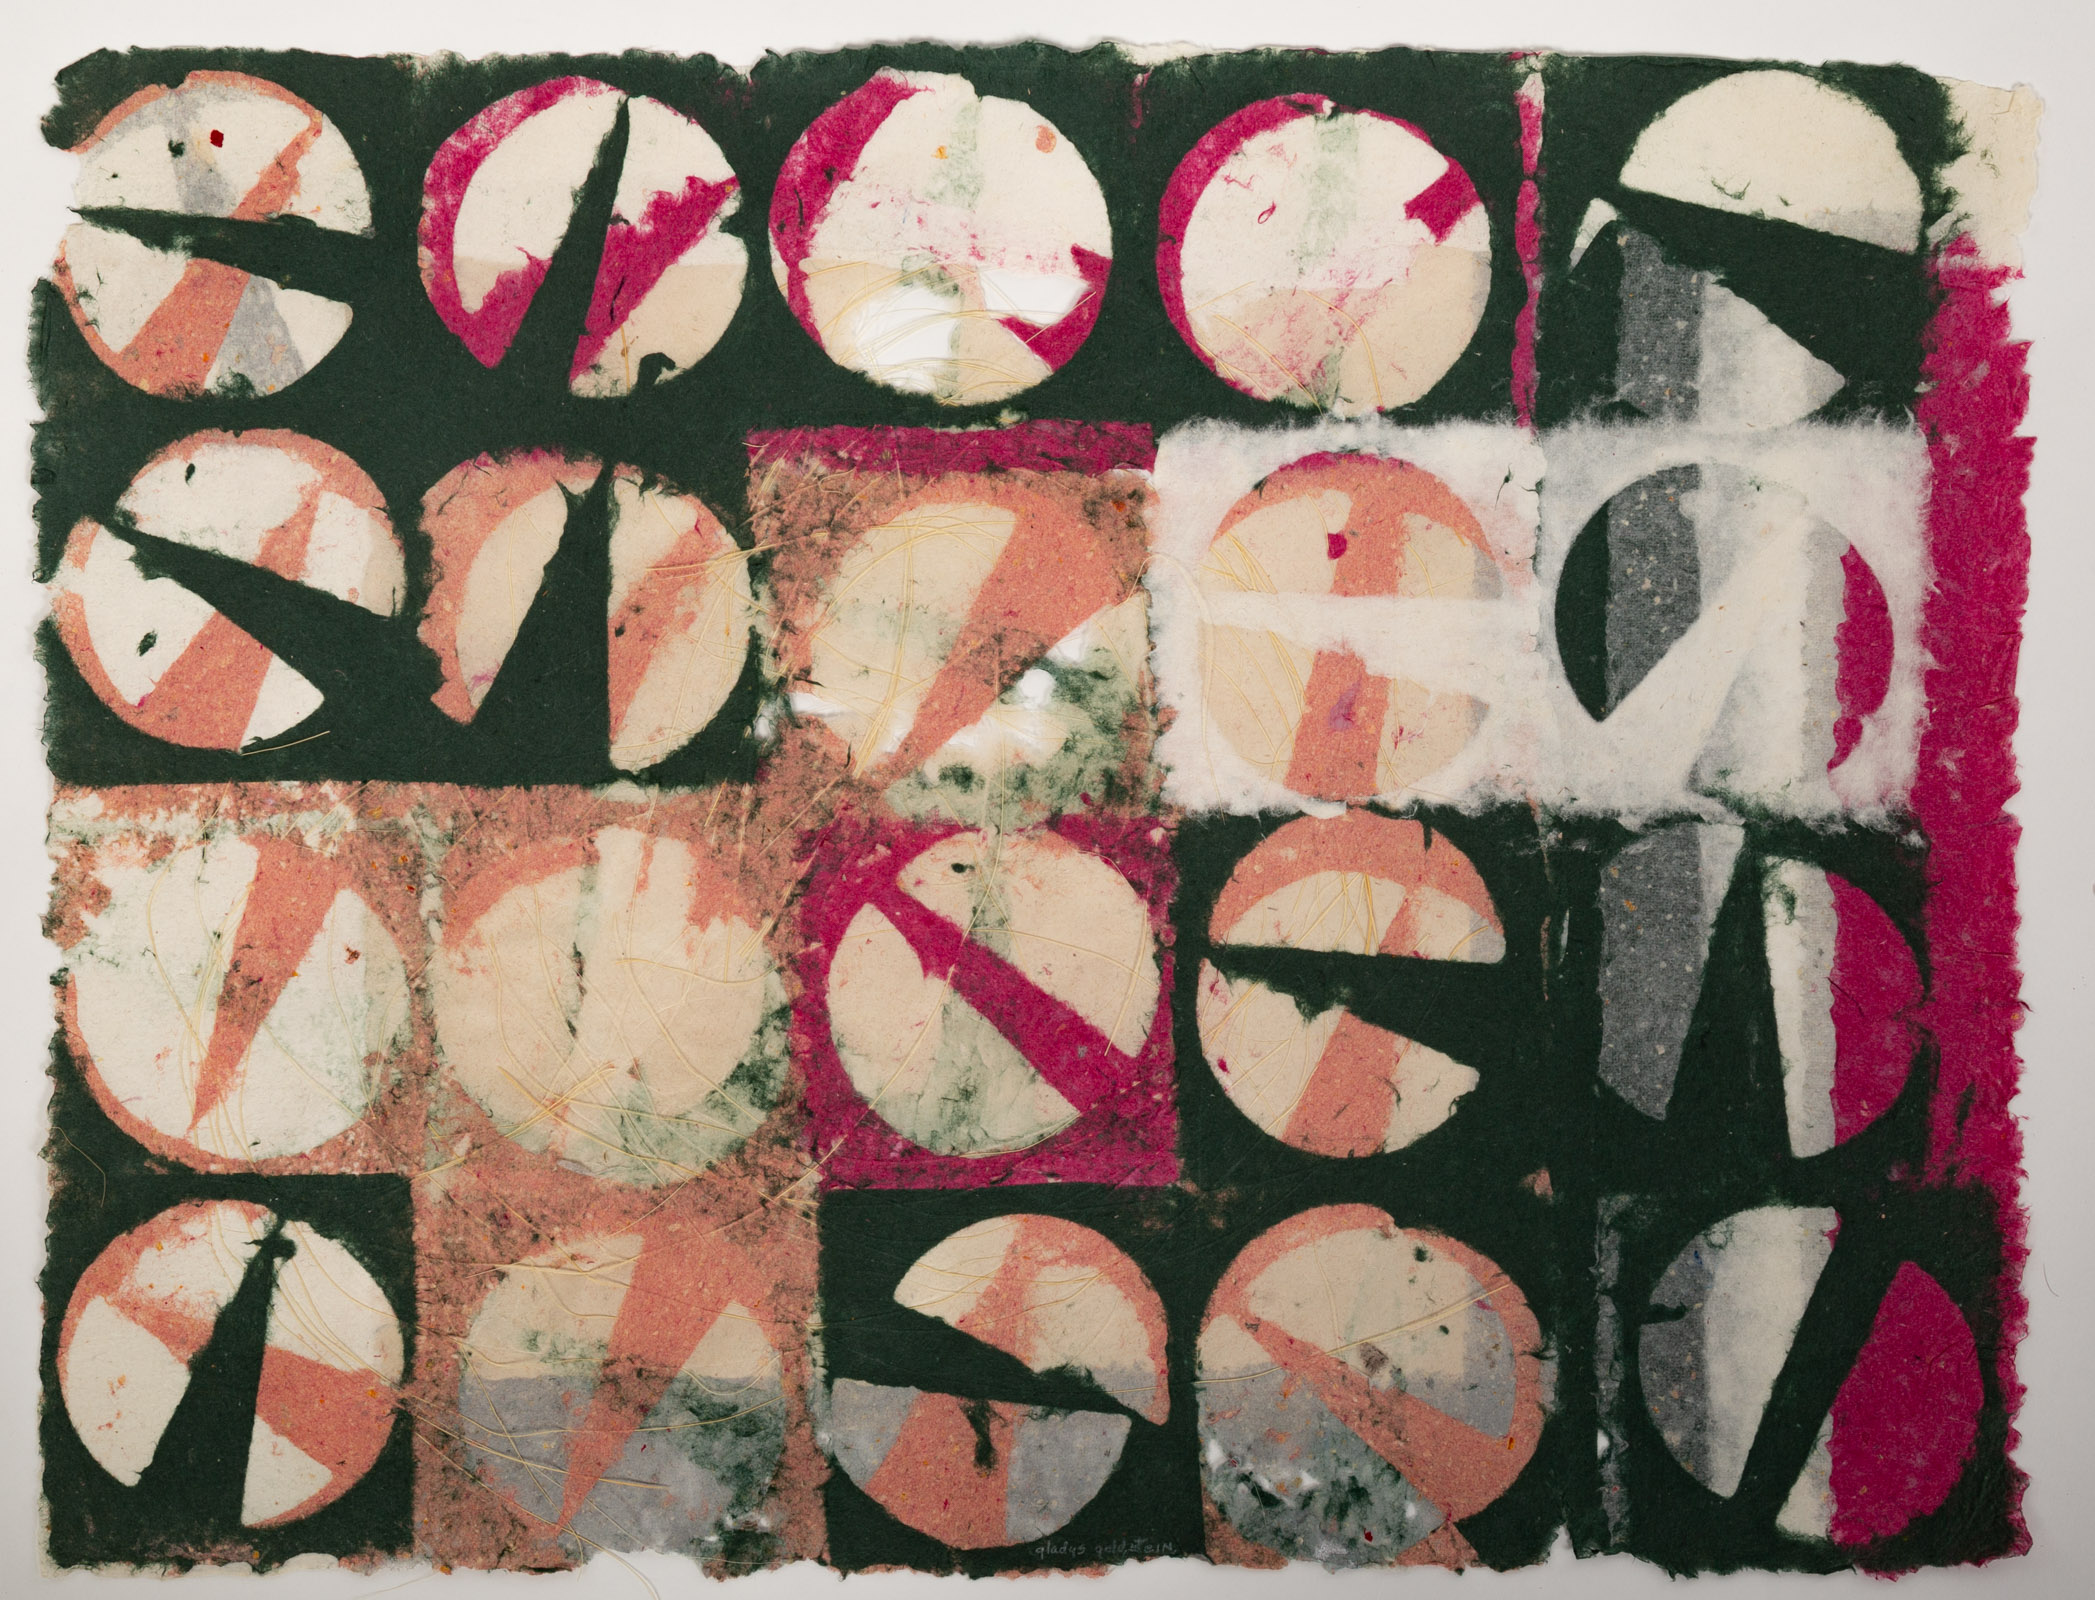 GLADYS GOLDSTEIN. ABSTRACT IN PINK